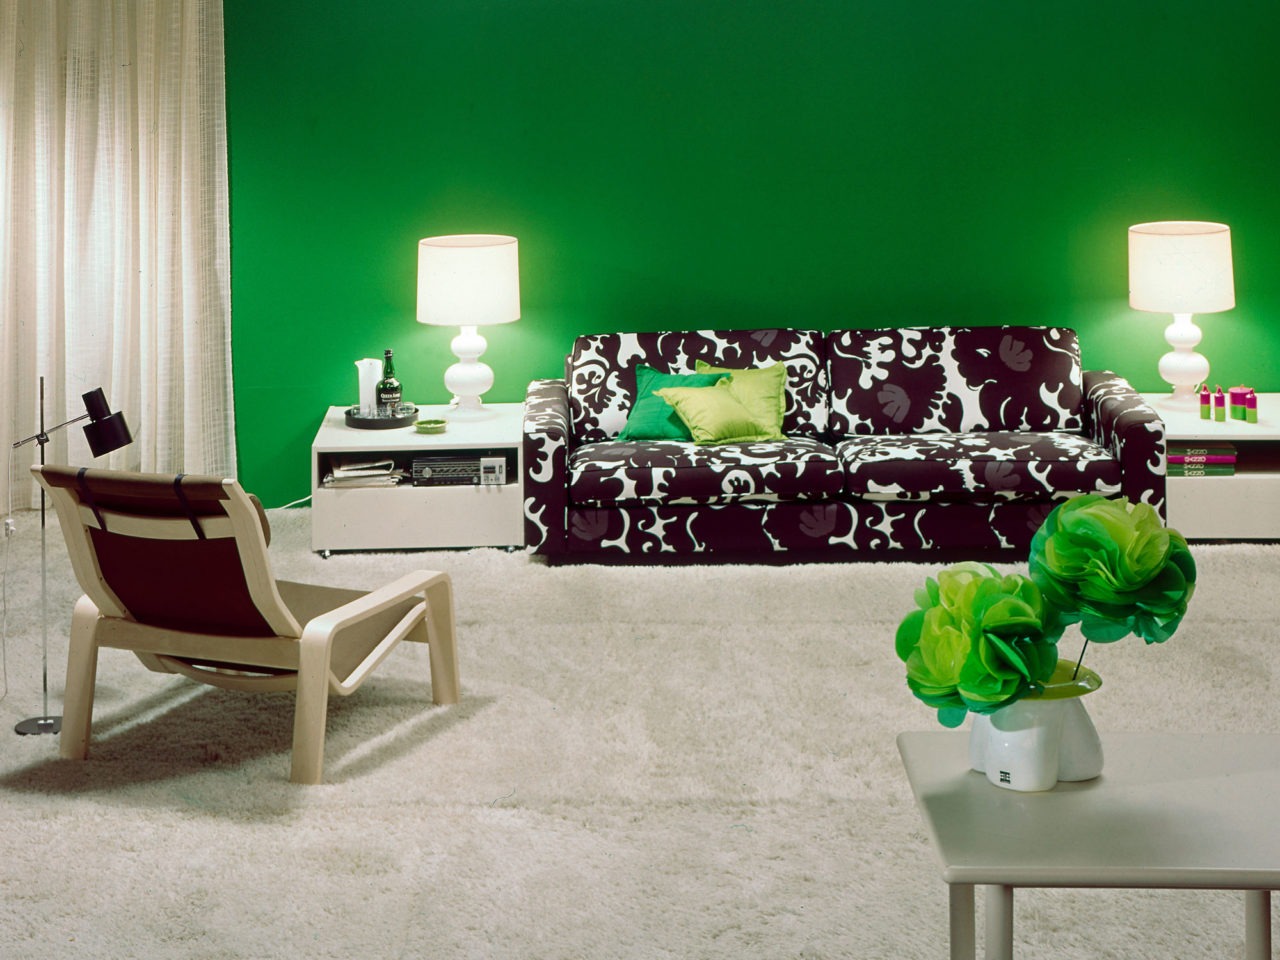 Black and white patterned MIX sofa, in a carpeted room, that has details in white and decorations and a wall in bright green.